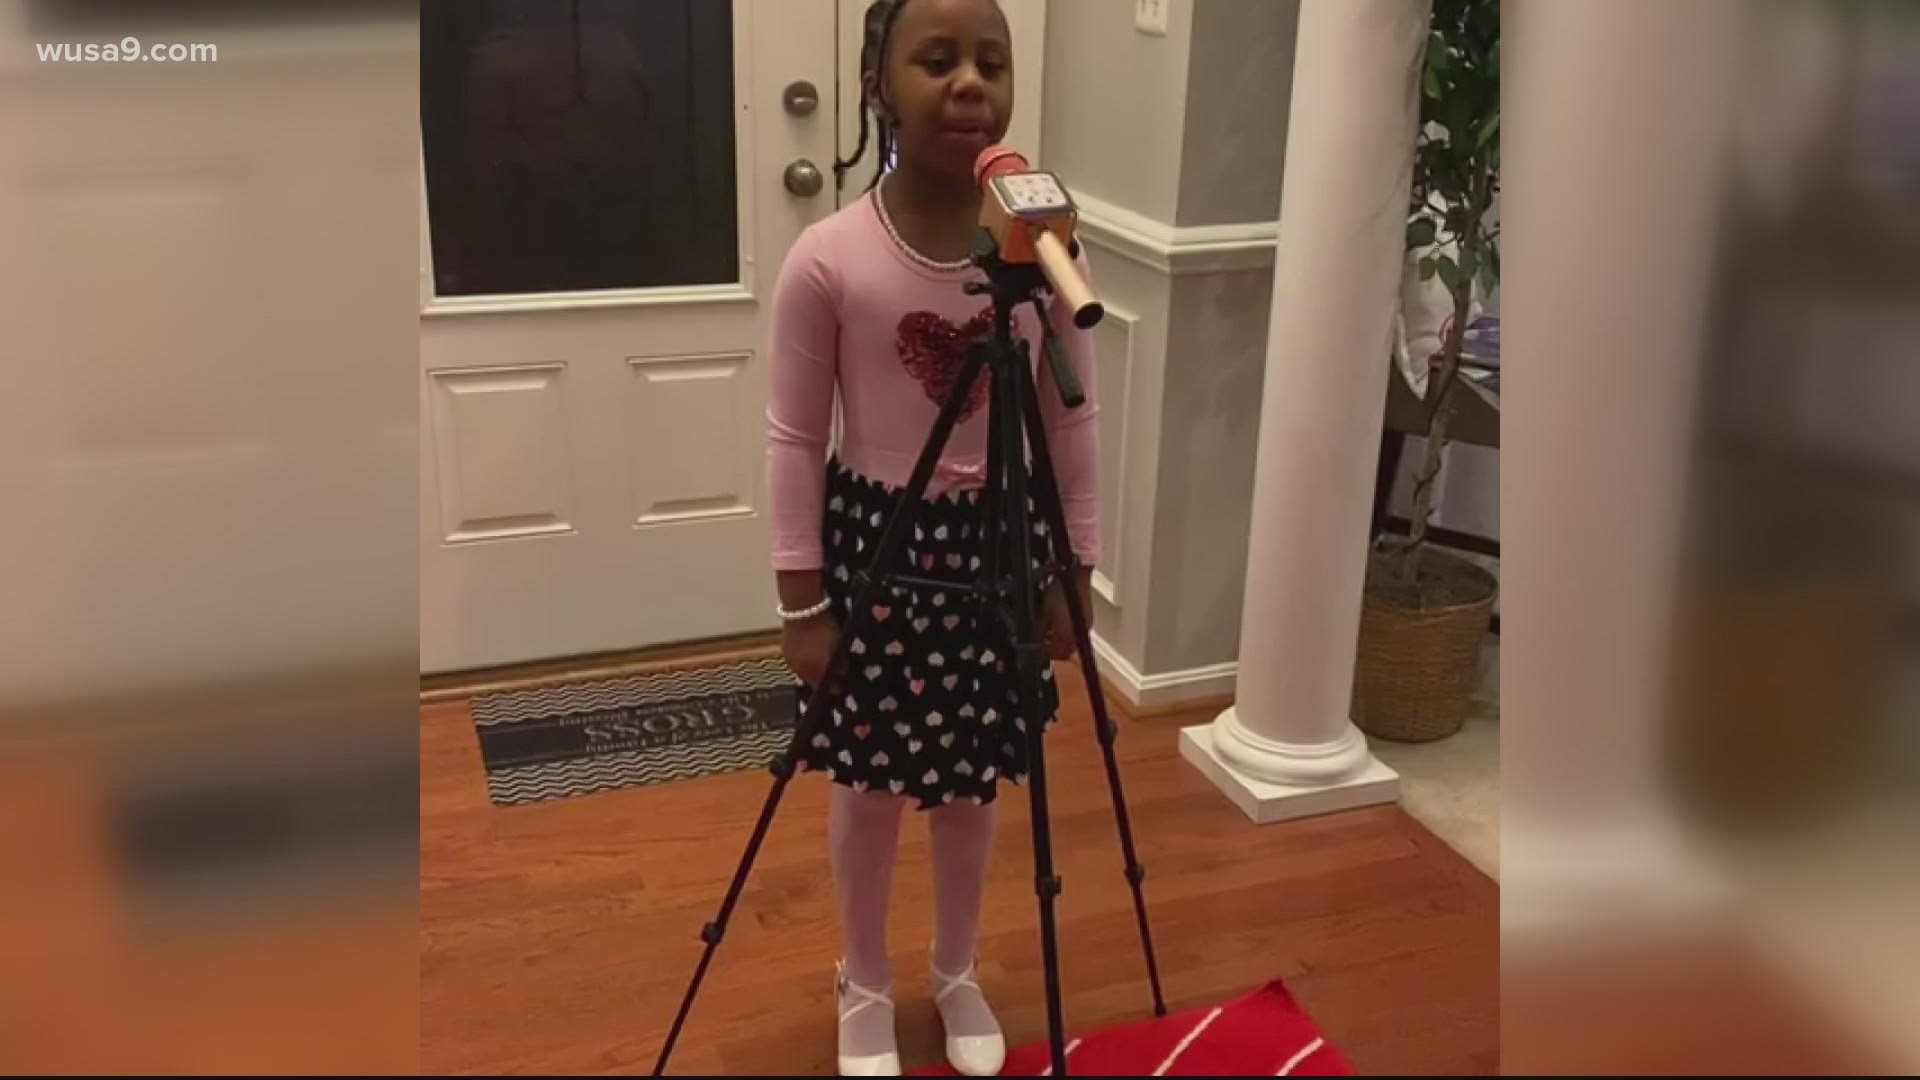 This girl's singing valentine has us all feeling the love.